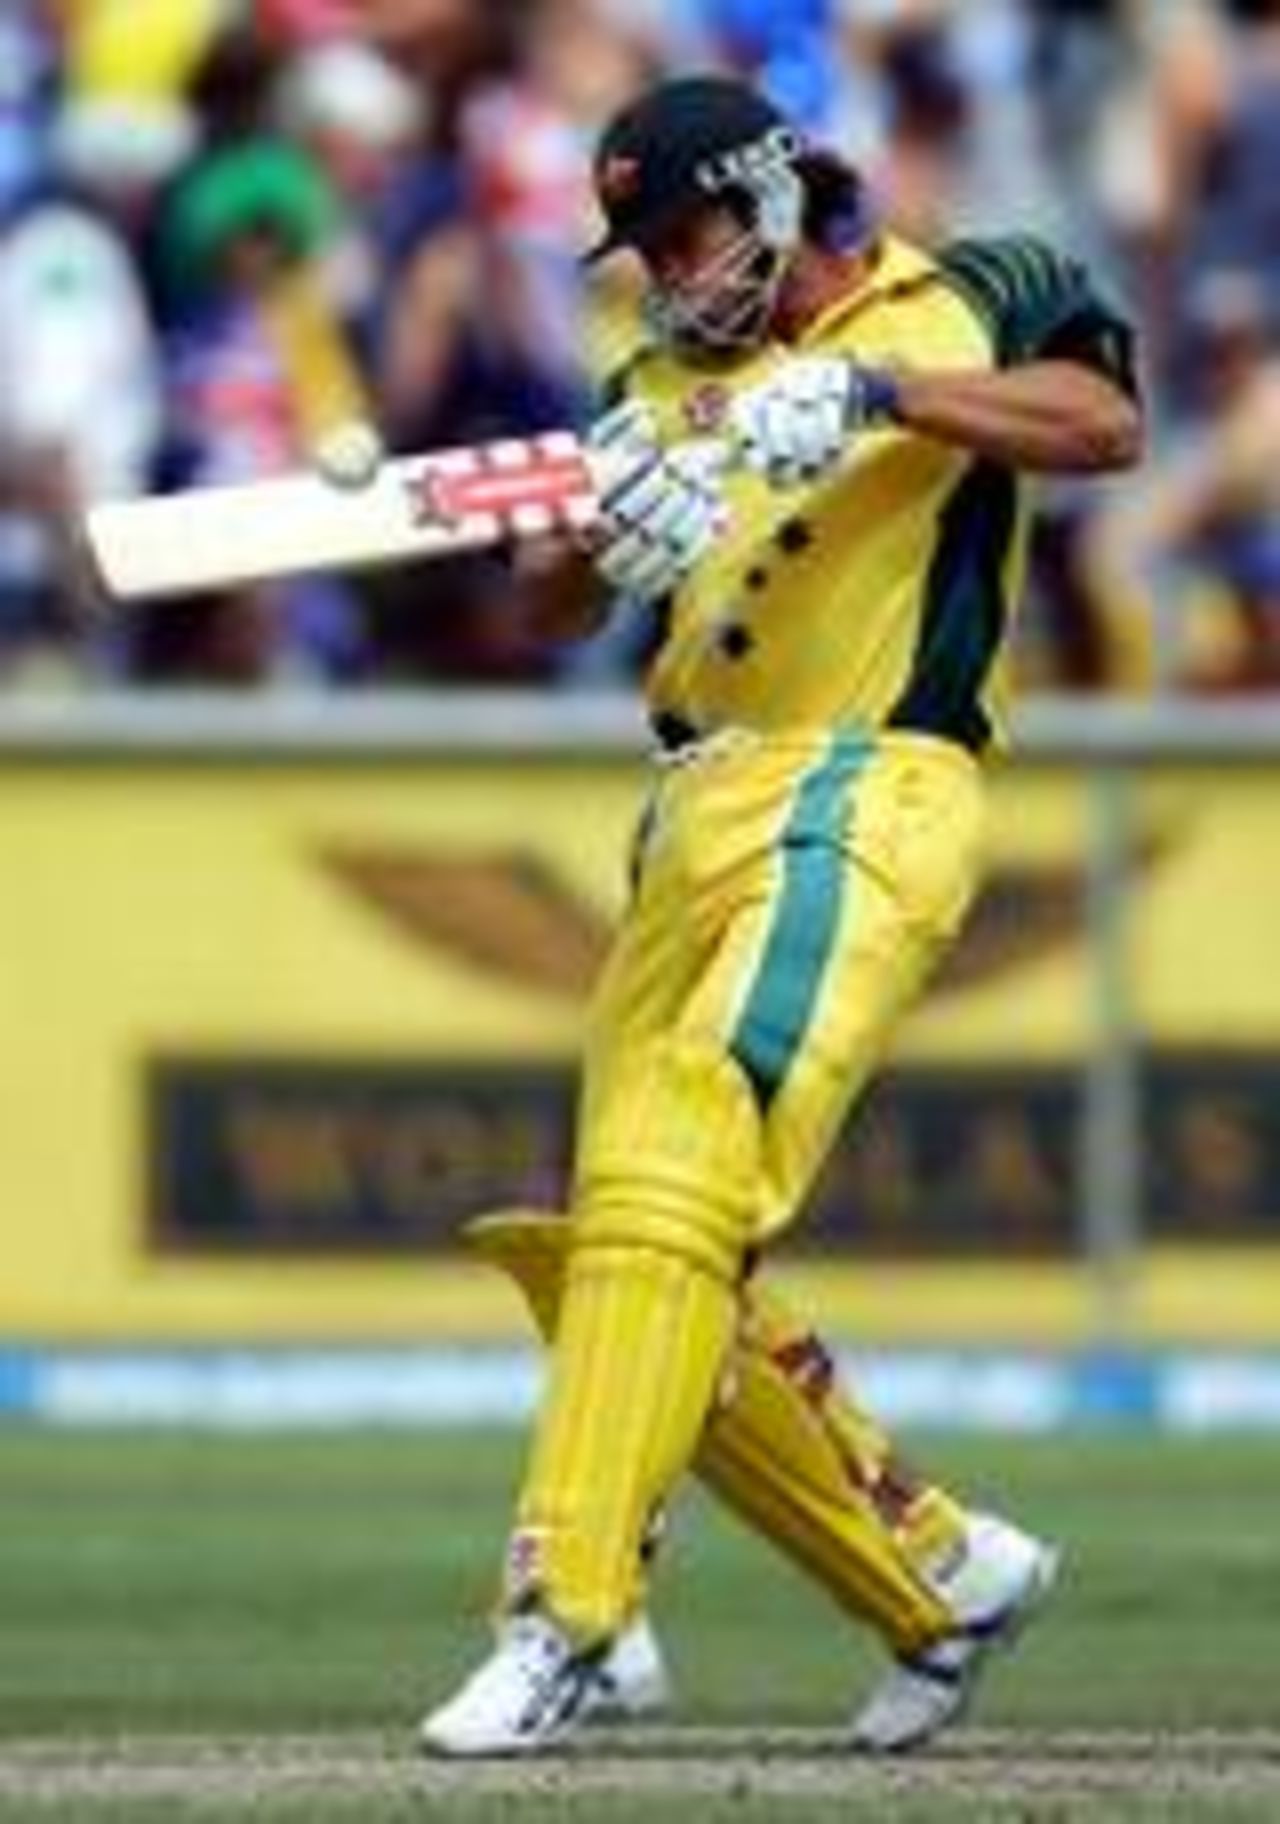 Andrew Symonds on his way to a matchwinning 91, Australia v Pakistan, Melbourne, 4 February 2005